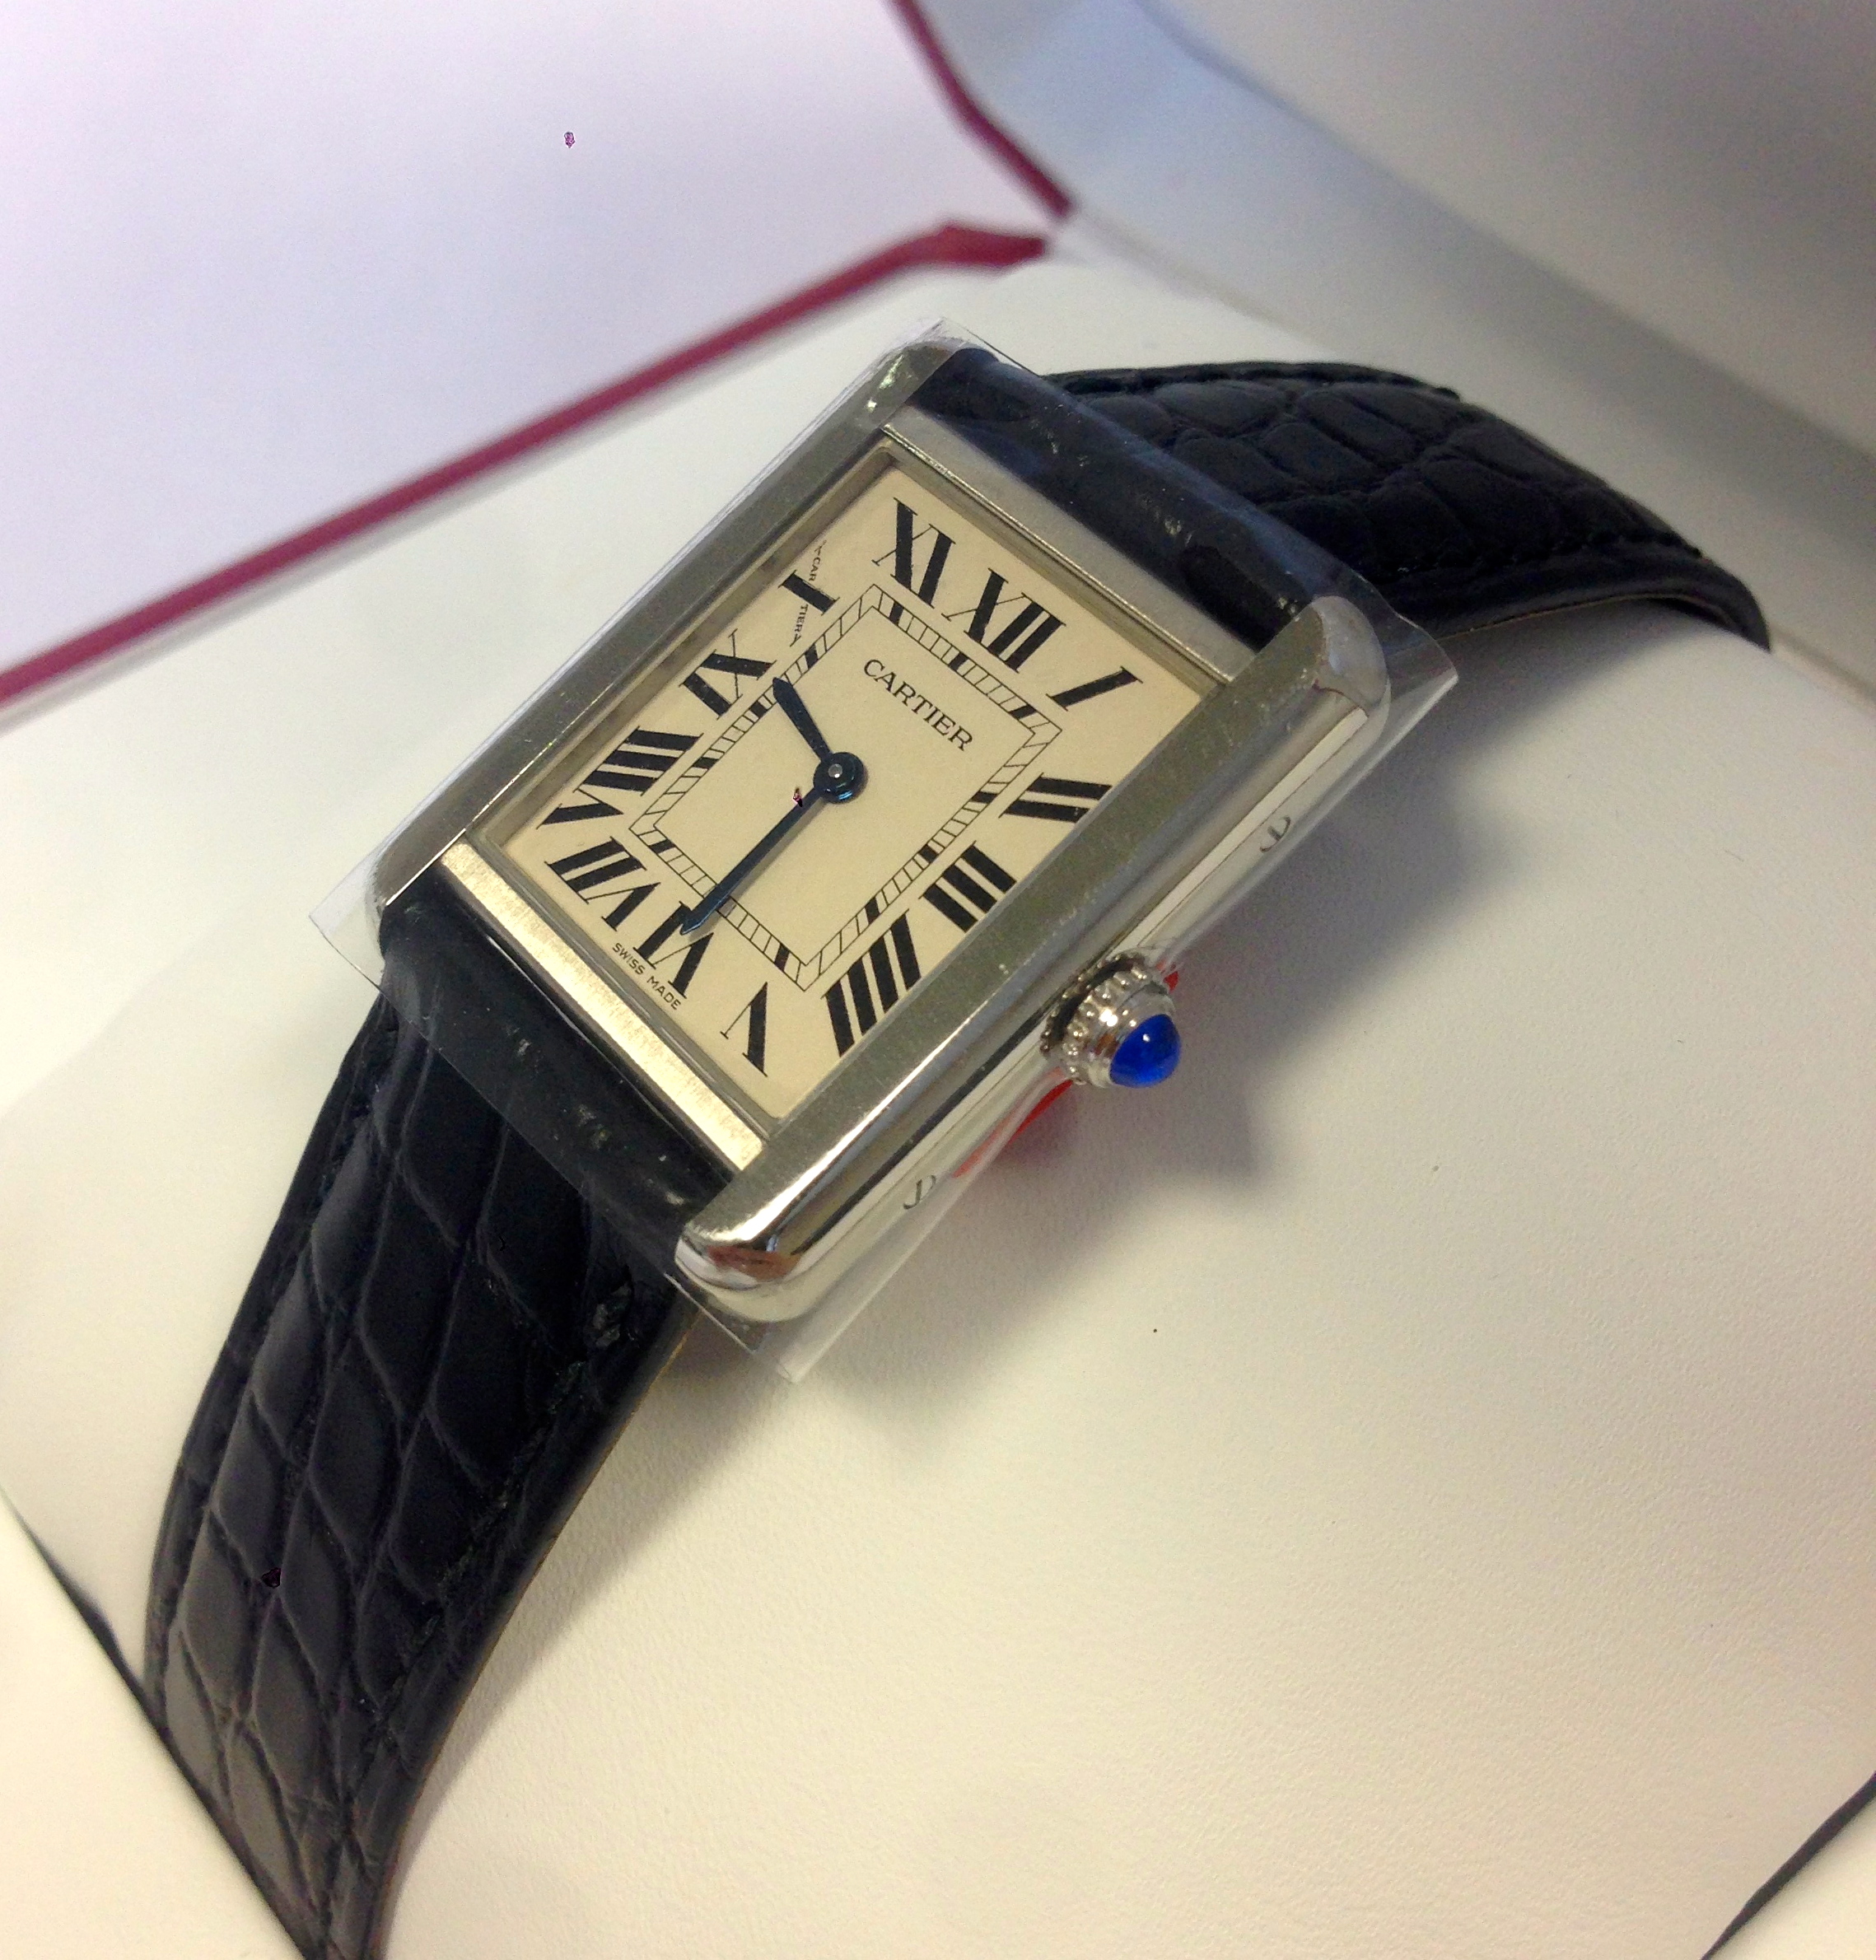 cartier tank solo ladies watch price